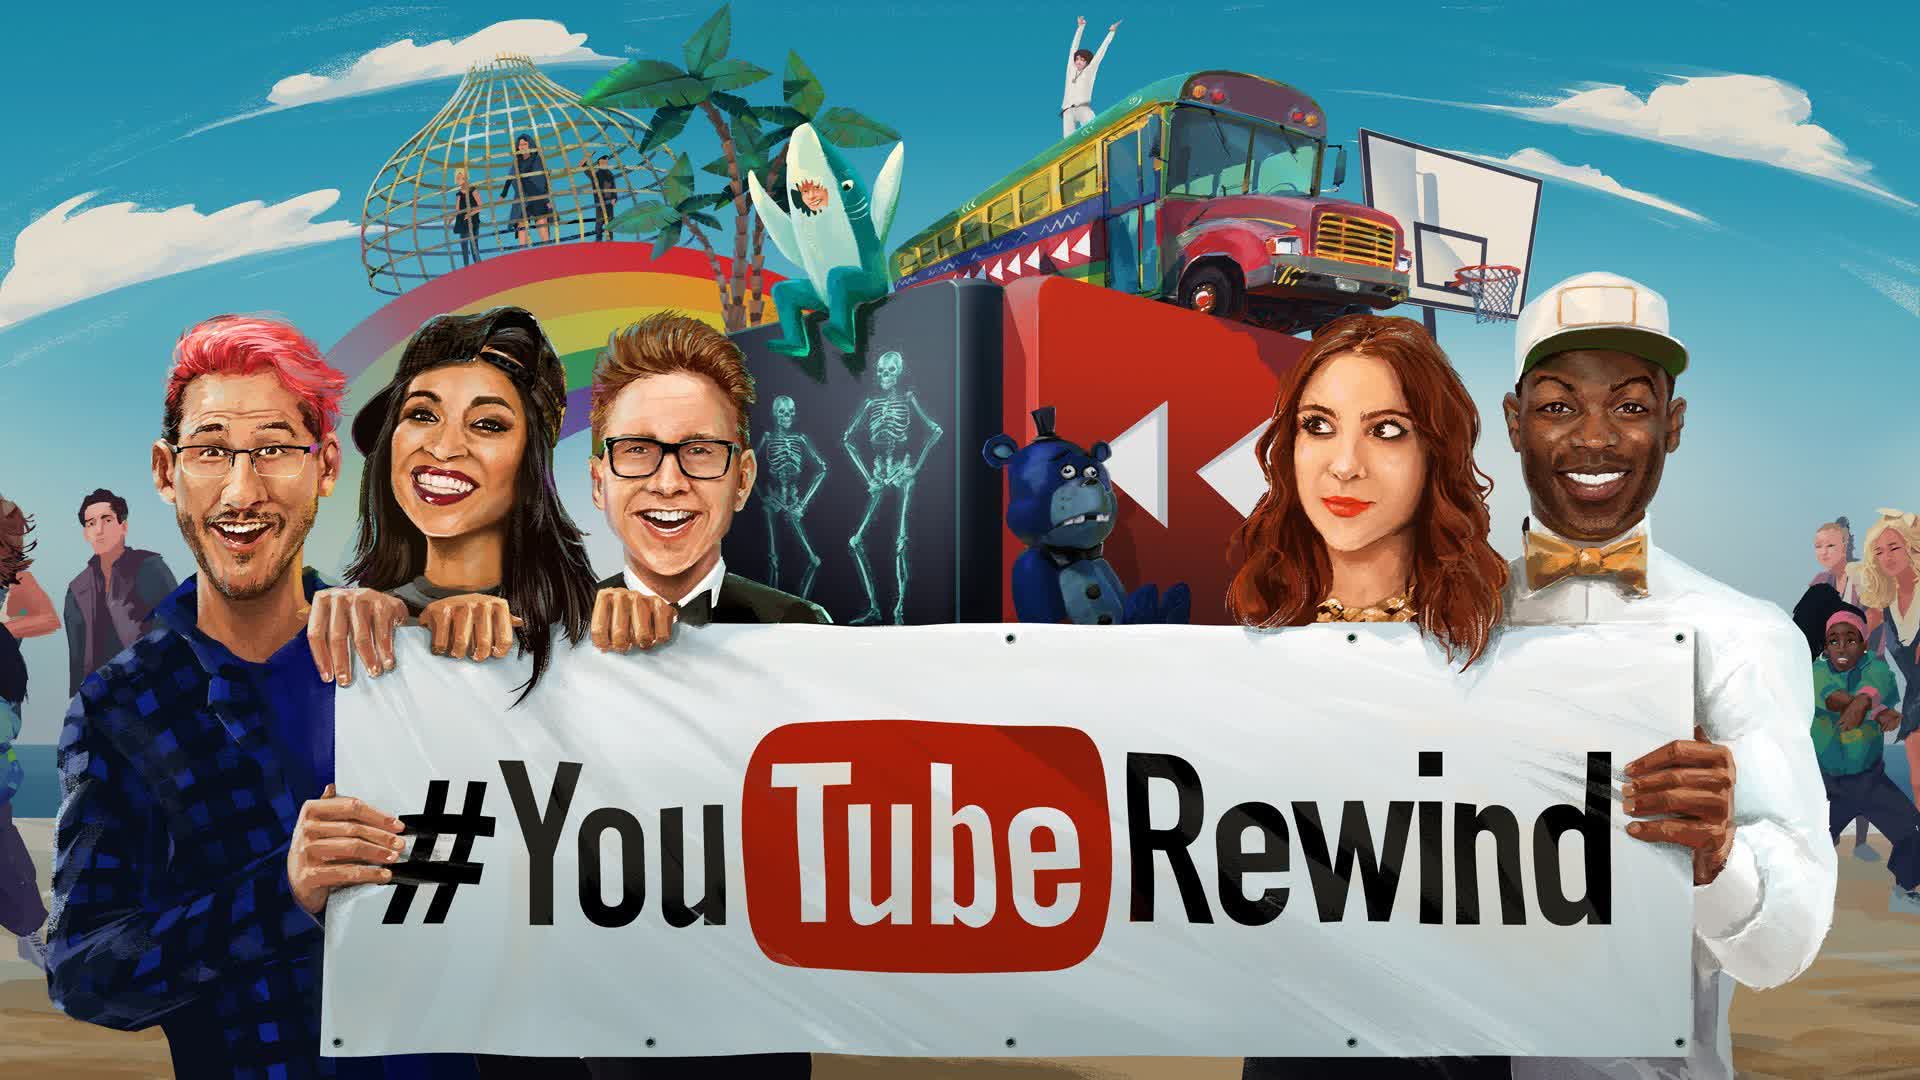 For the first time in a decade, there will be no YouTube Rewind this year